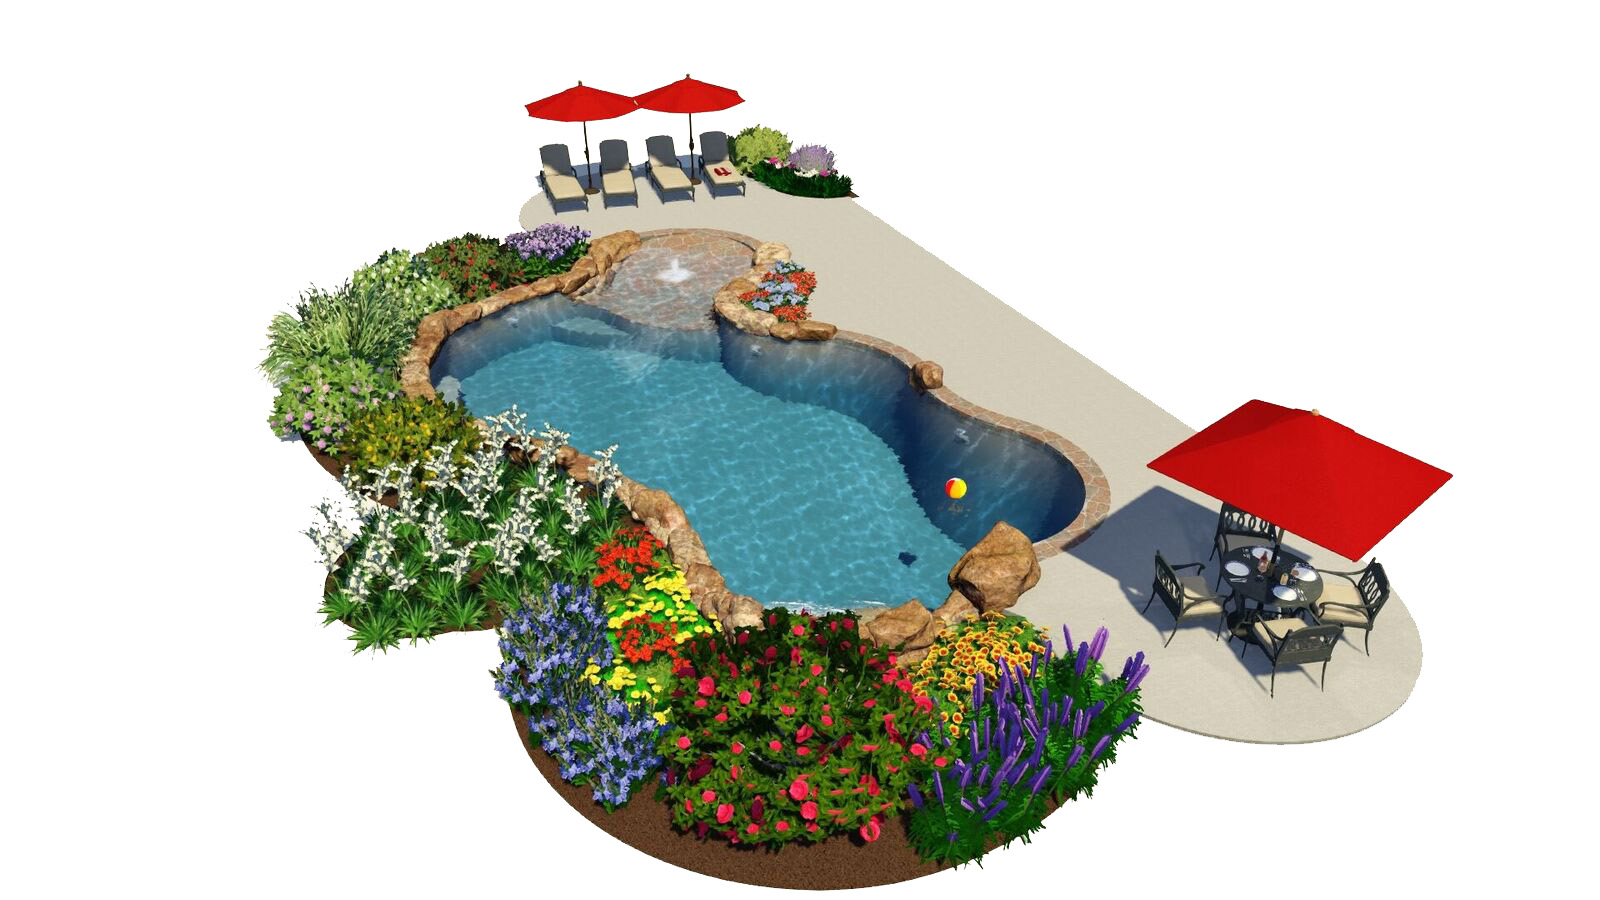 about_pool_design